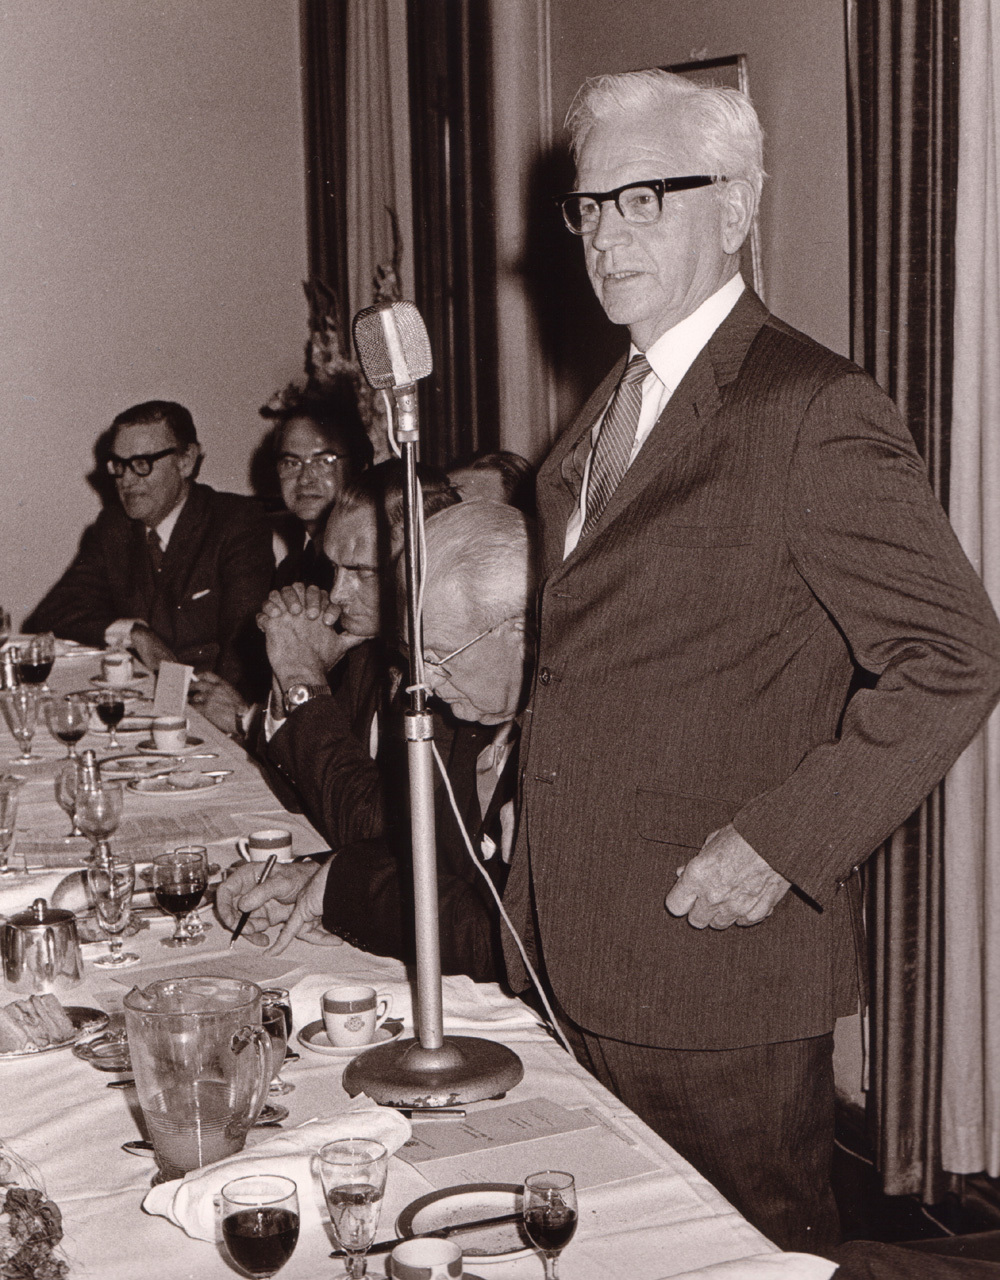 PHOTOGRAPHS OF THE INAUGURATION DINNER FOR THE CHAIR OF HORTICULTURE, MCMILLAN SPEAKING